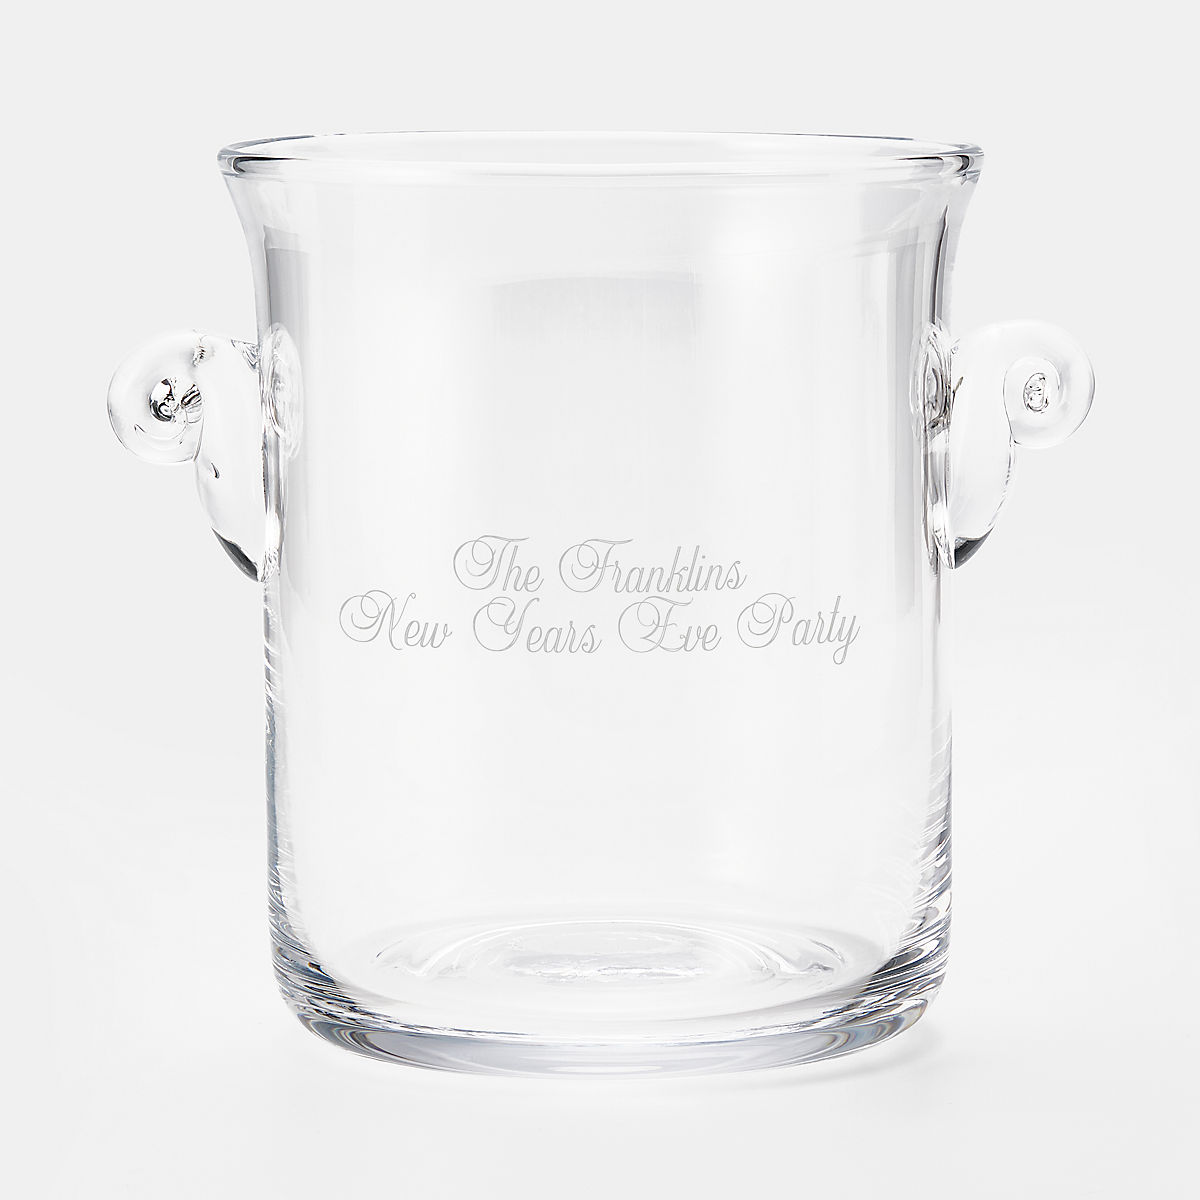 Karat Clear Glass Ice Bucket with Tongs & Carry Handle